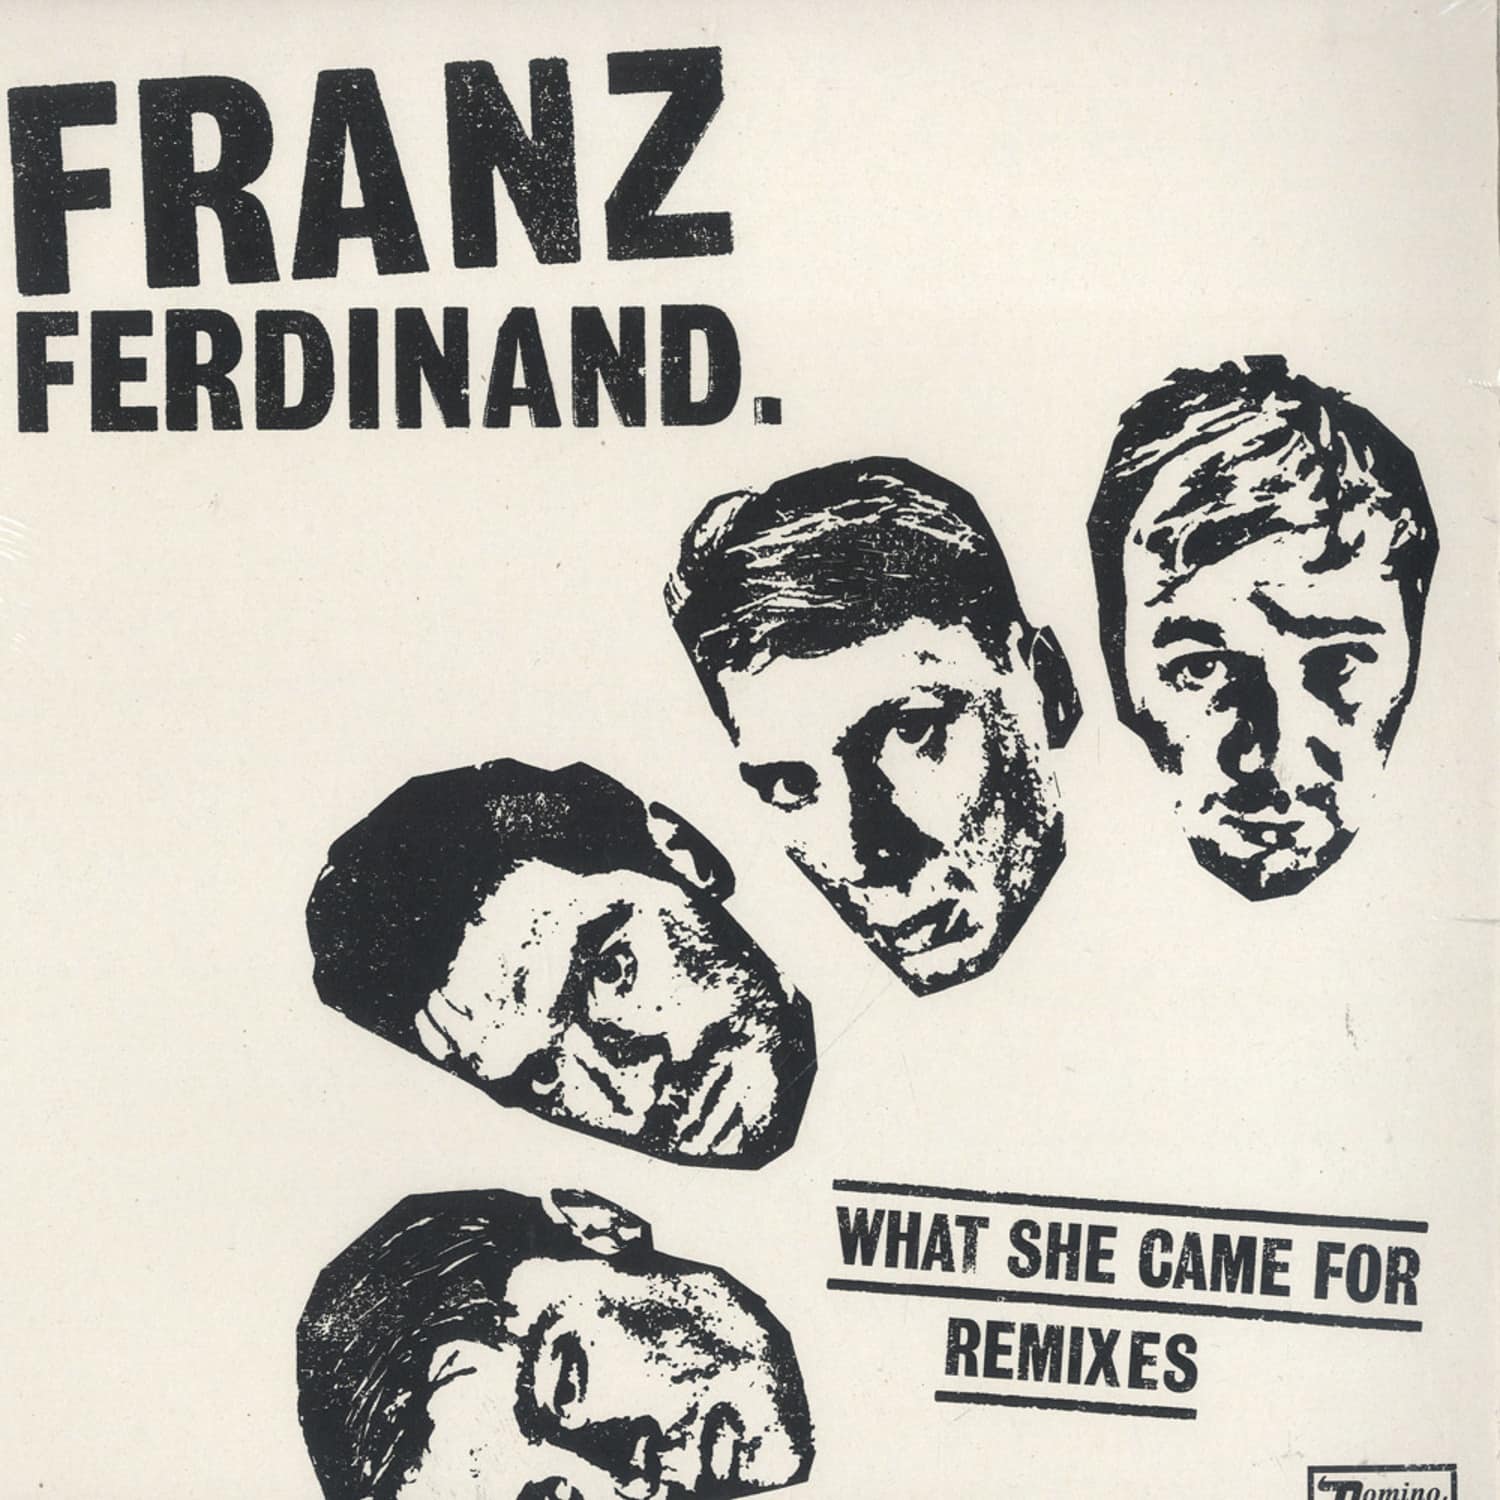 Franz Ferdinand - WHAT SHE CAME FOR REMIXES